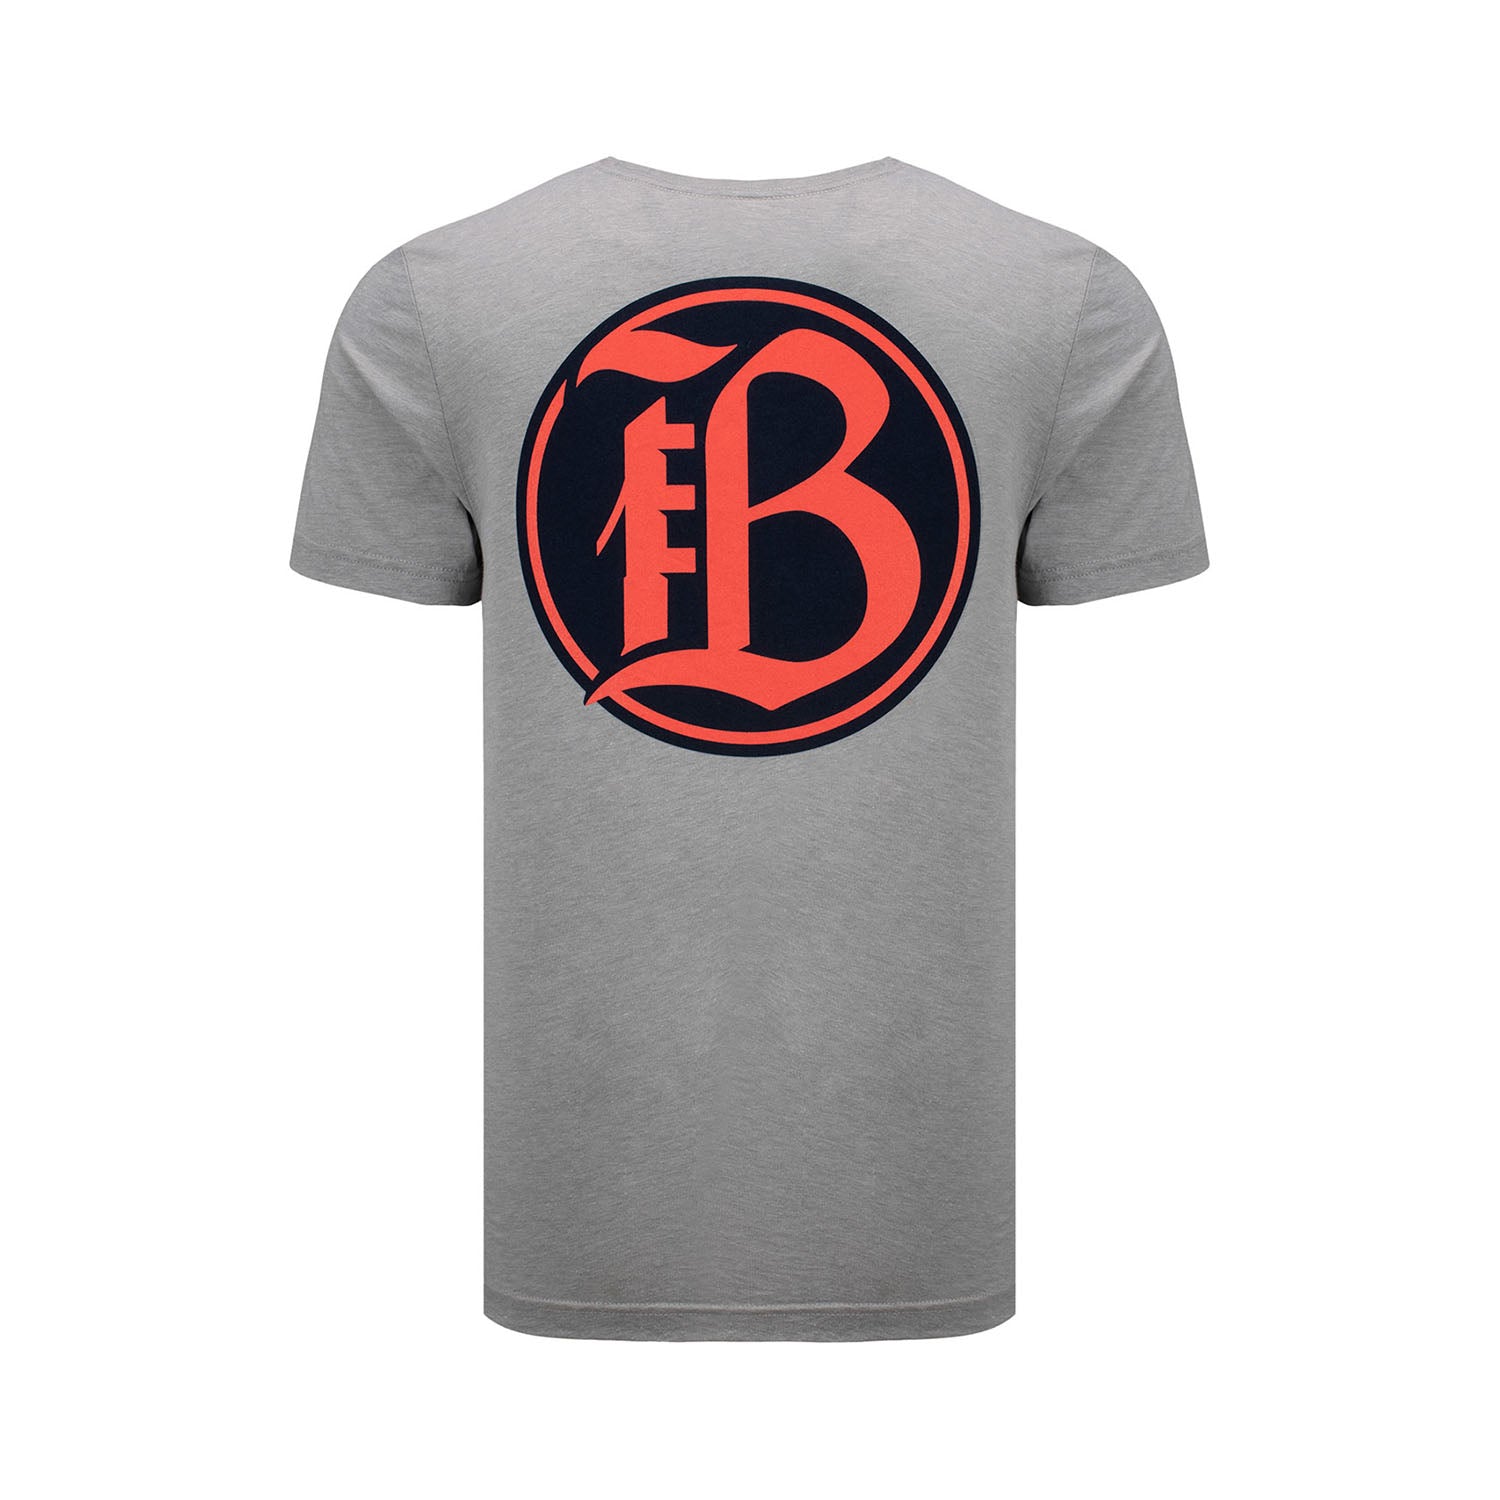 Unisex Bay FC Crest Grey Tee - Back View